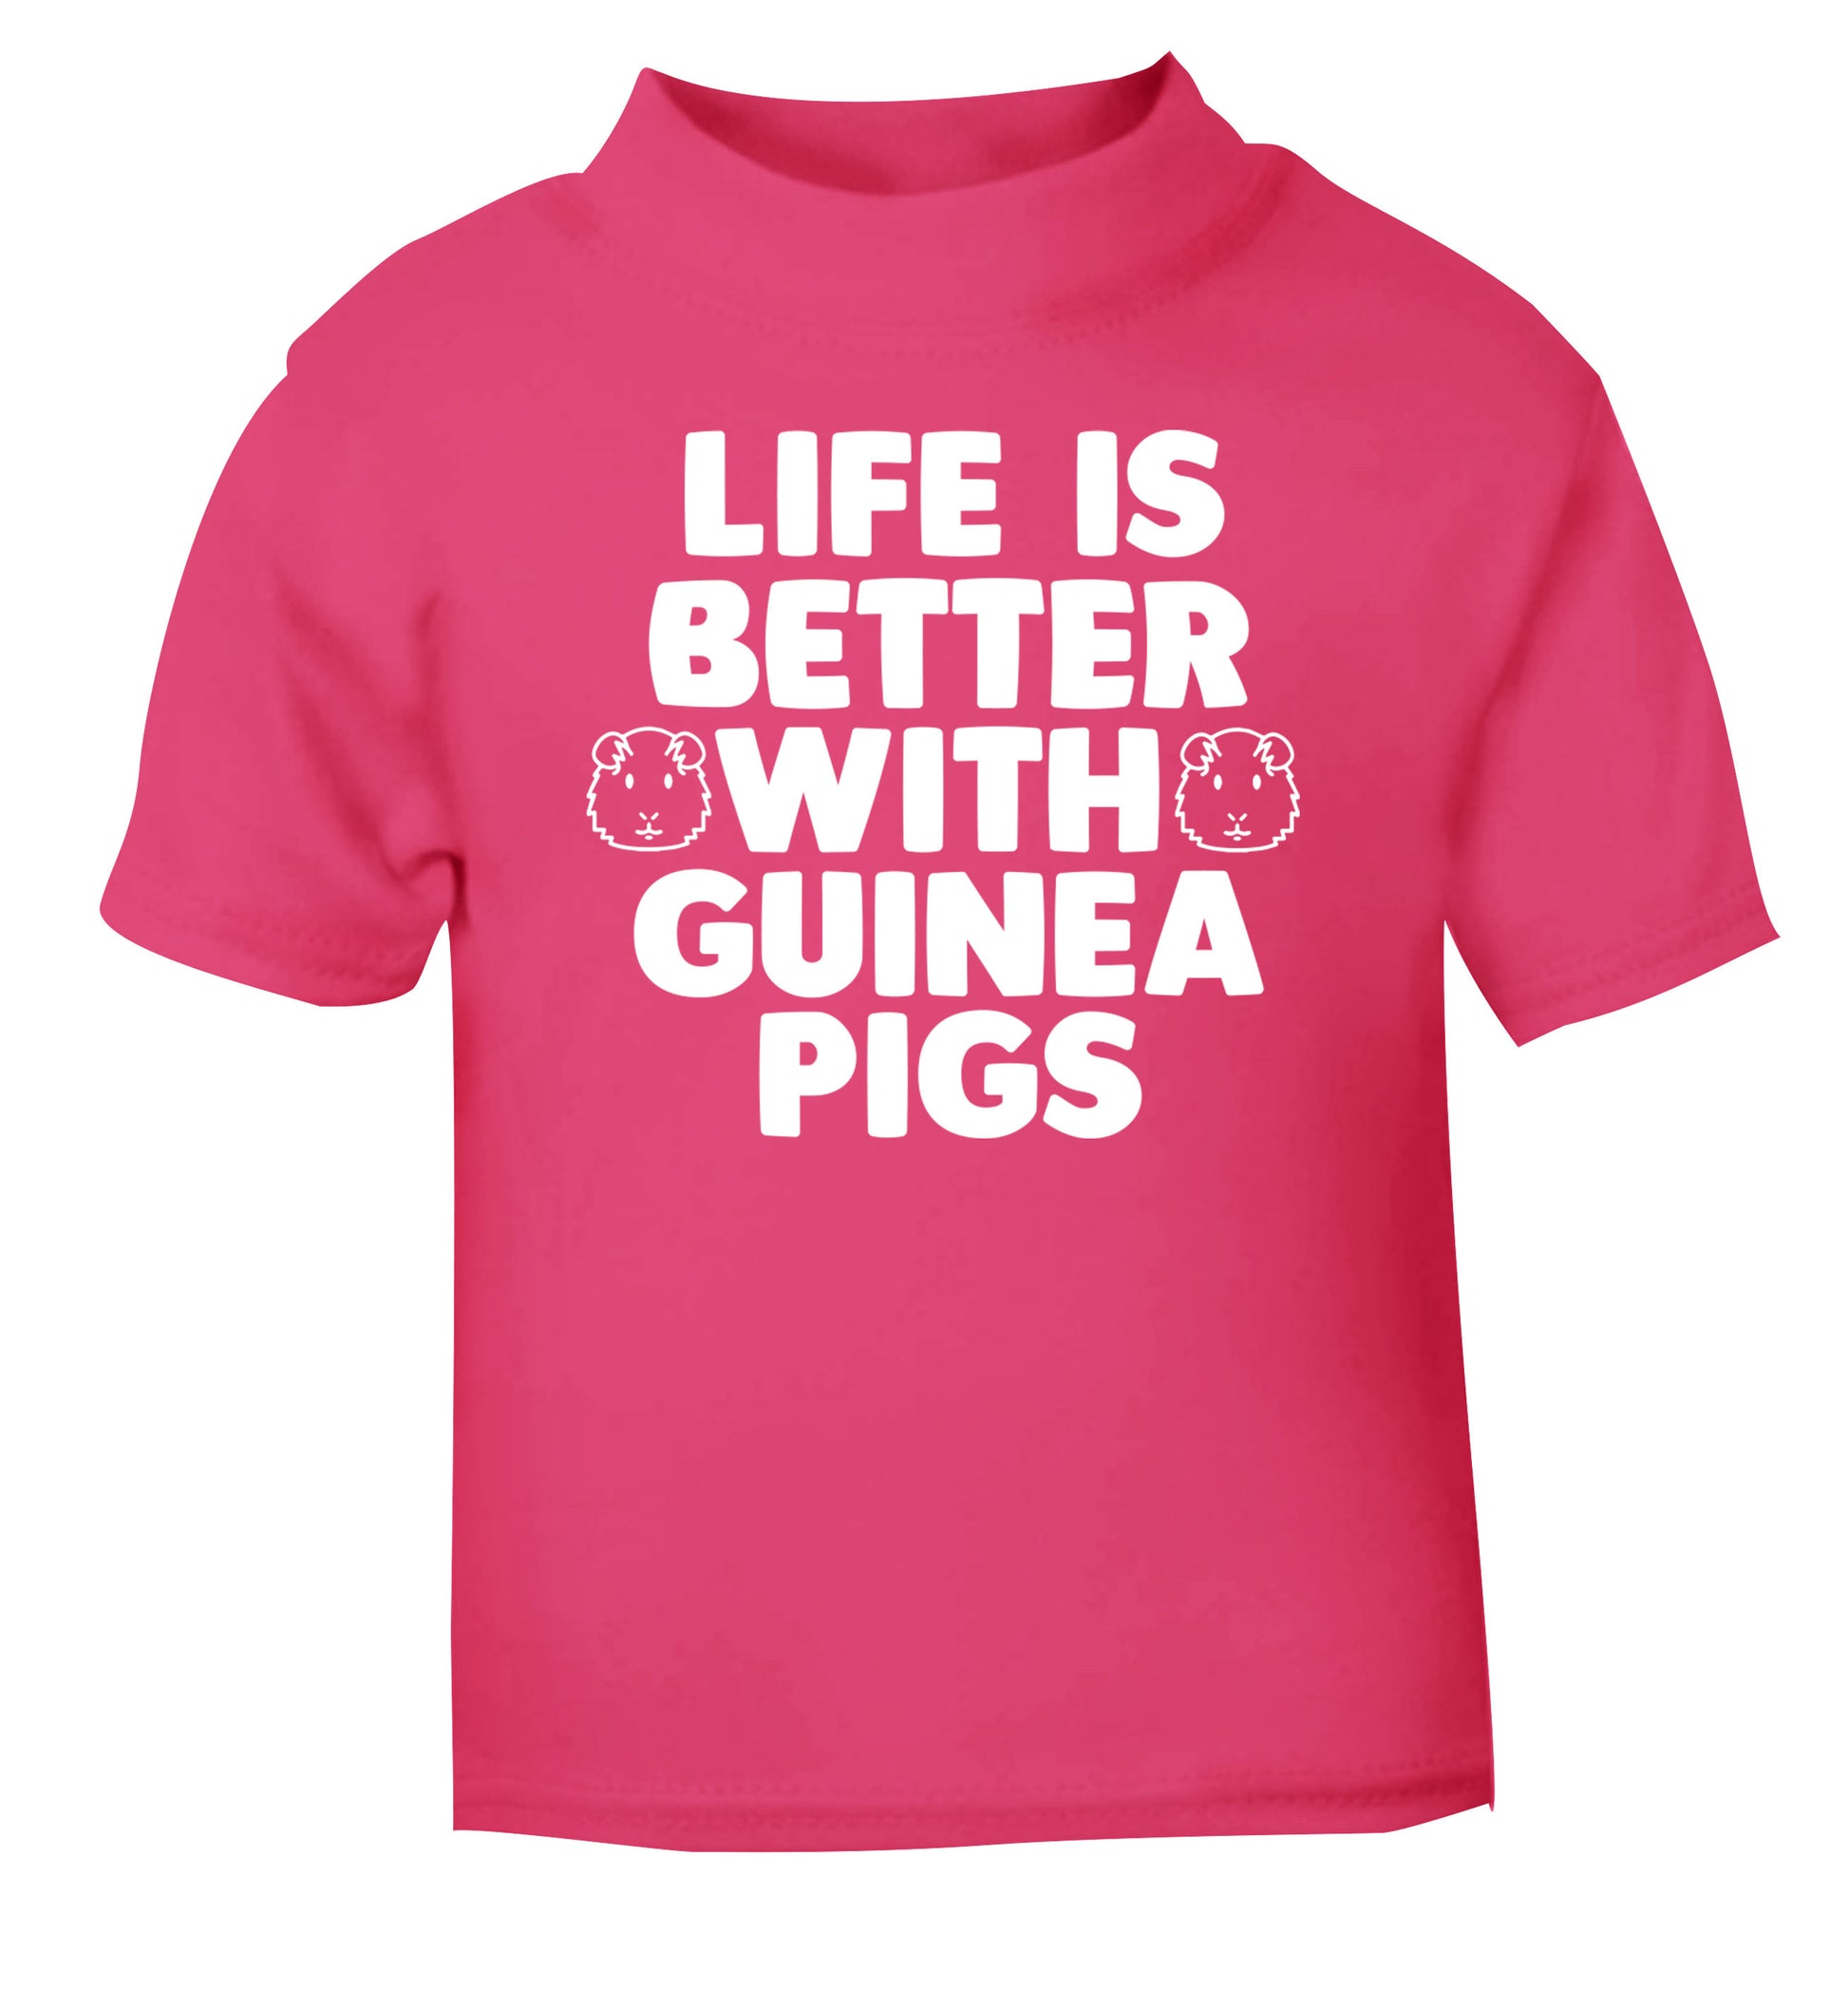 Life is better with guinea pigs pink Baby Toddler Tshirt 2 Years